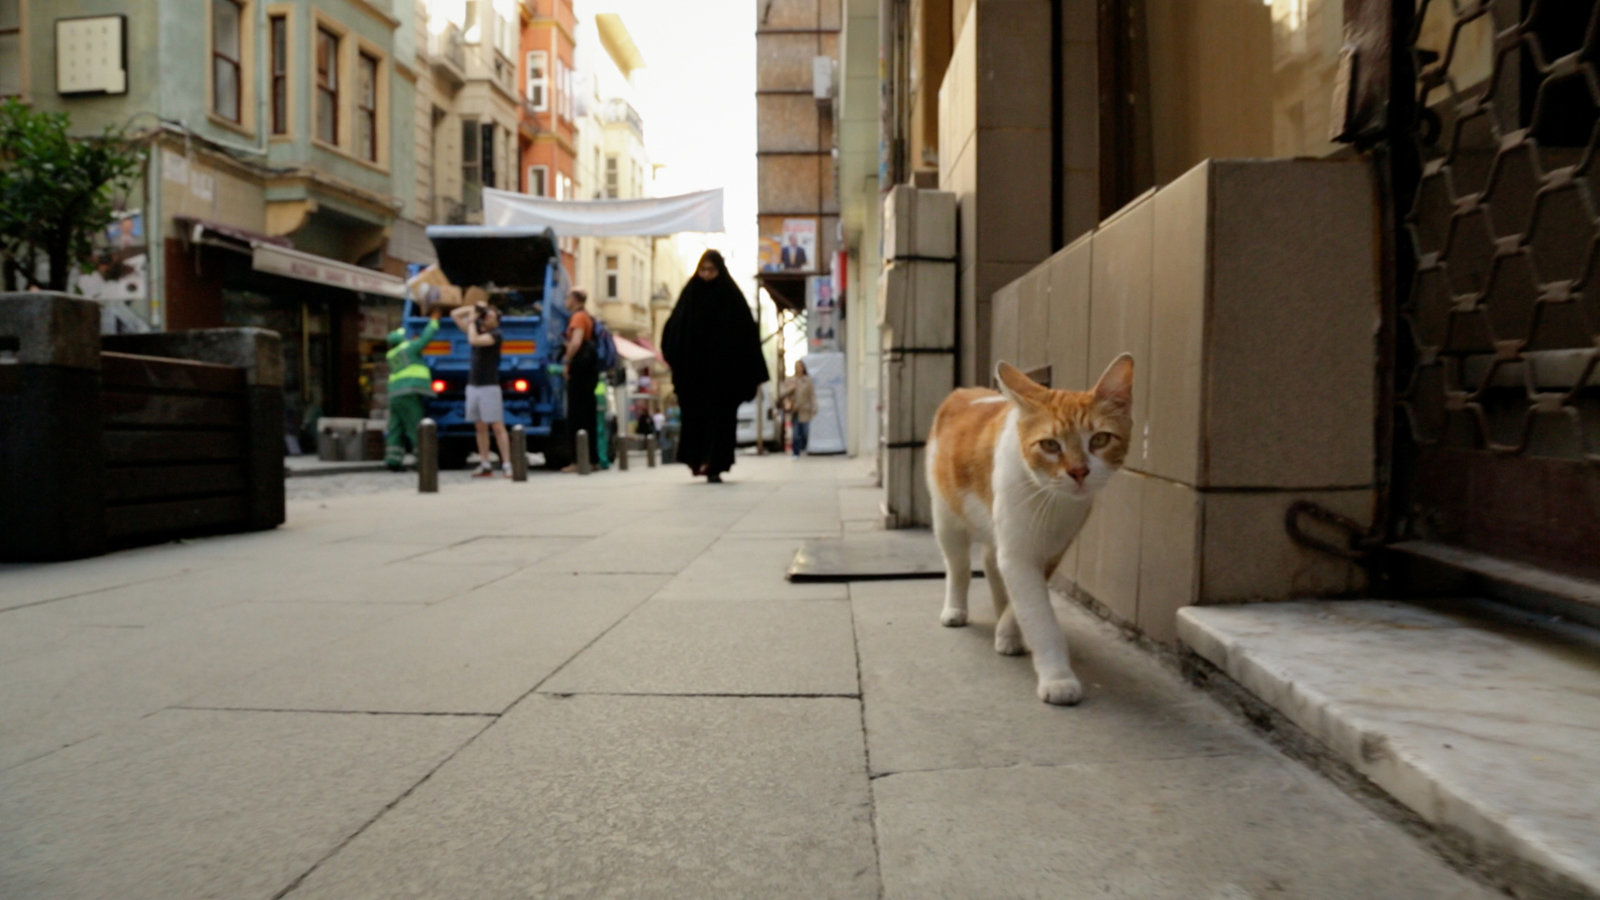 Orange and white cat walking on a sidewalk with people and buildings in the background